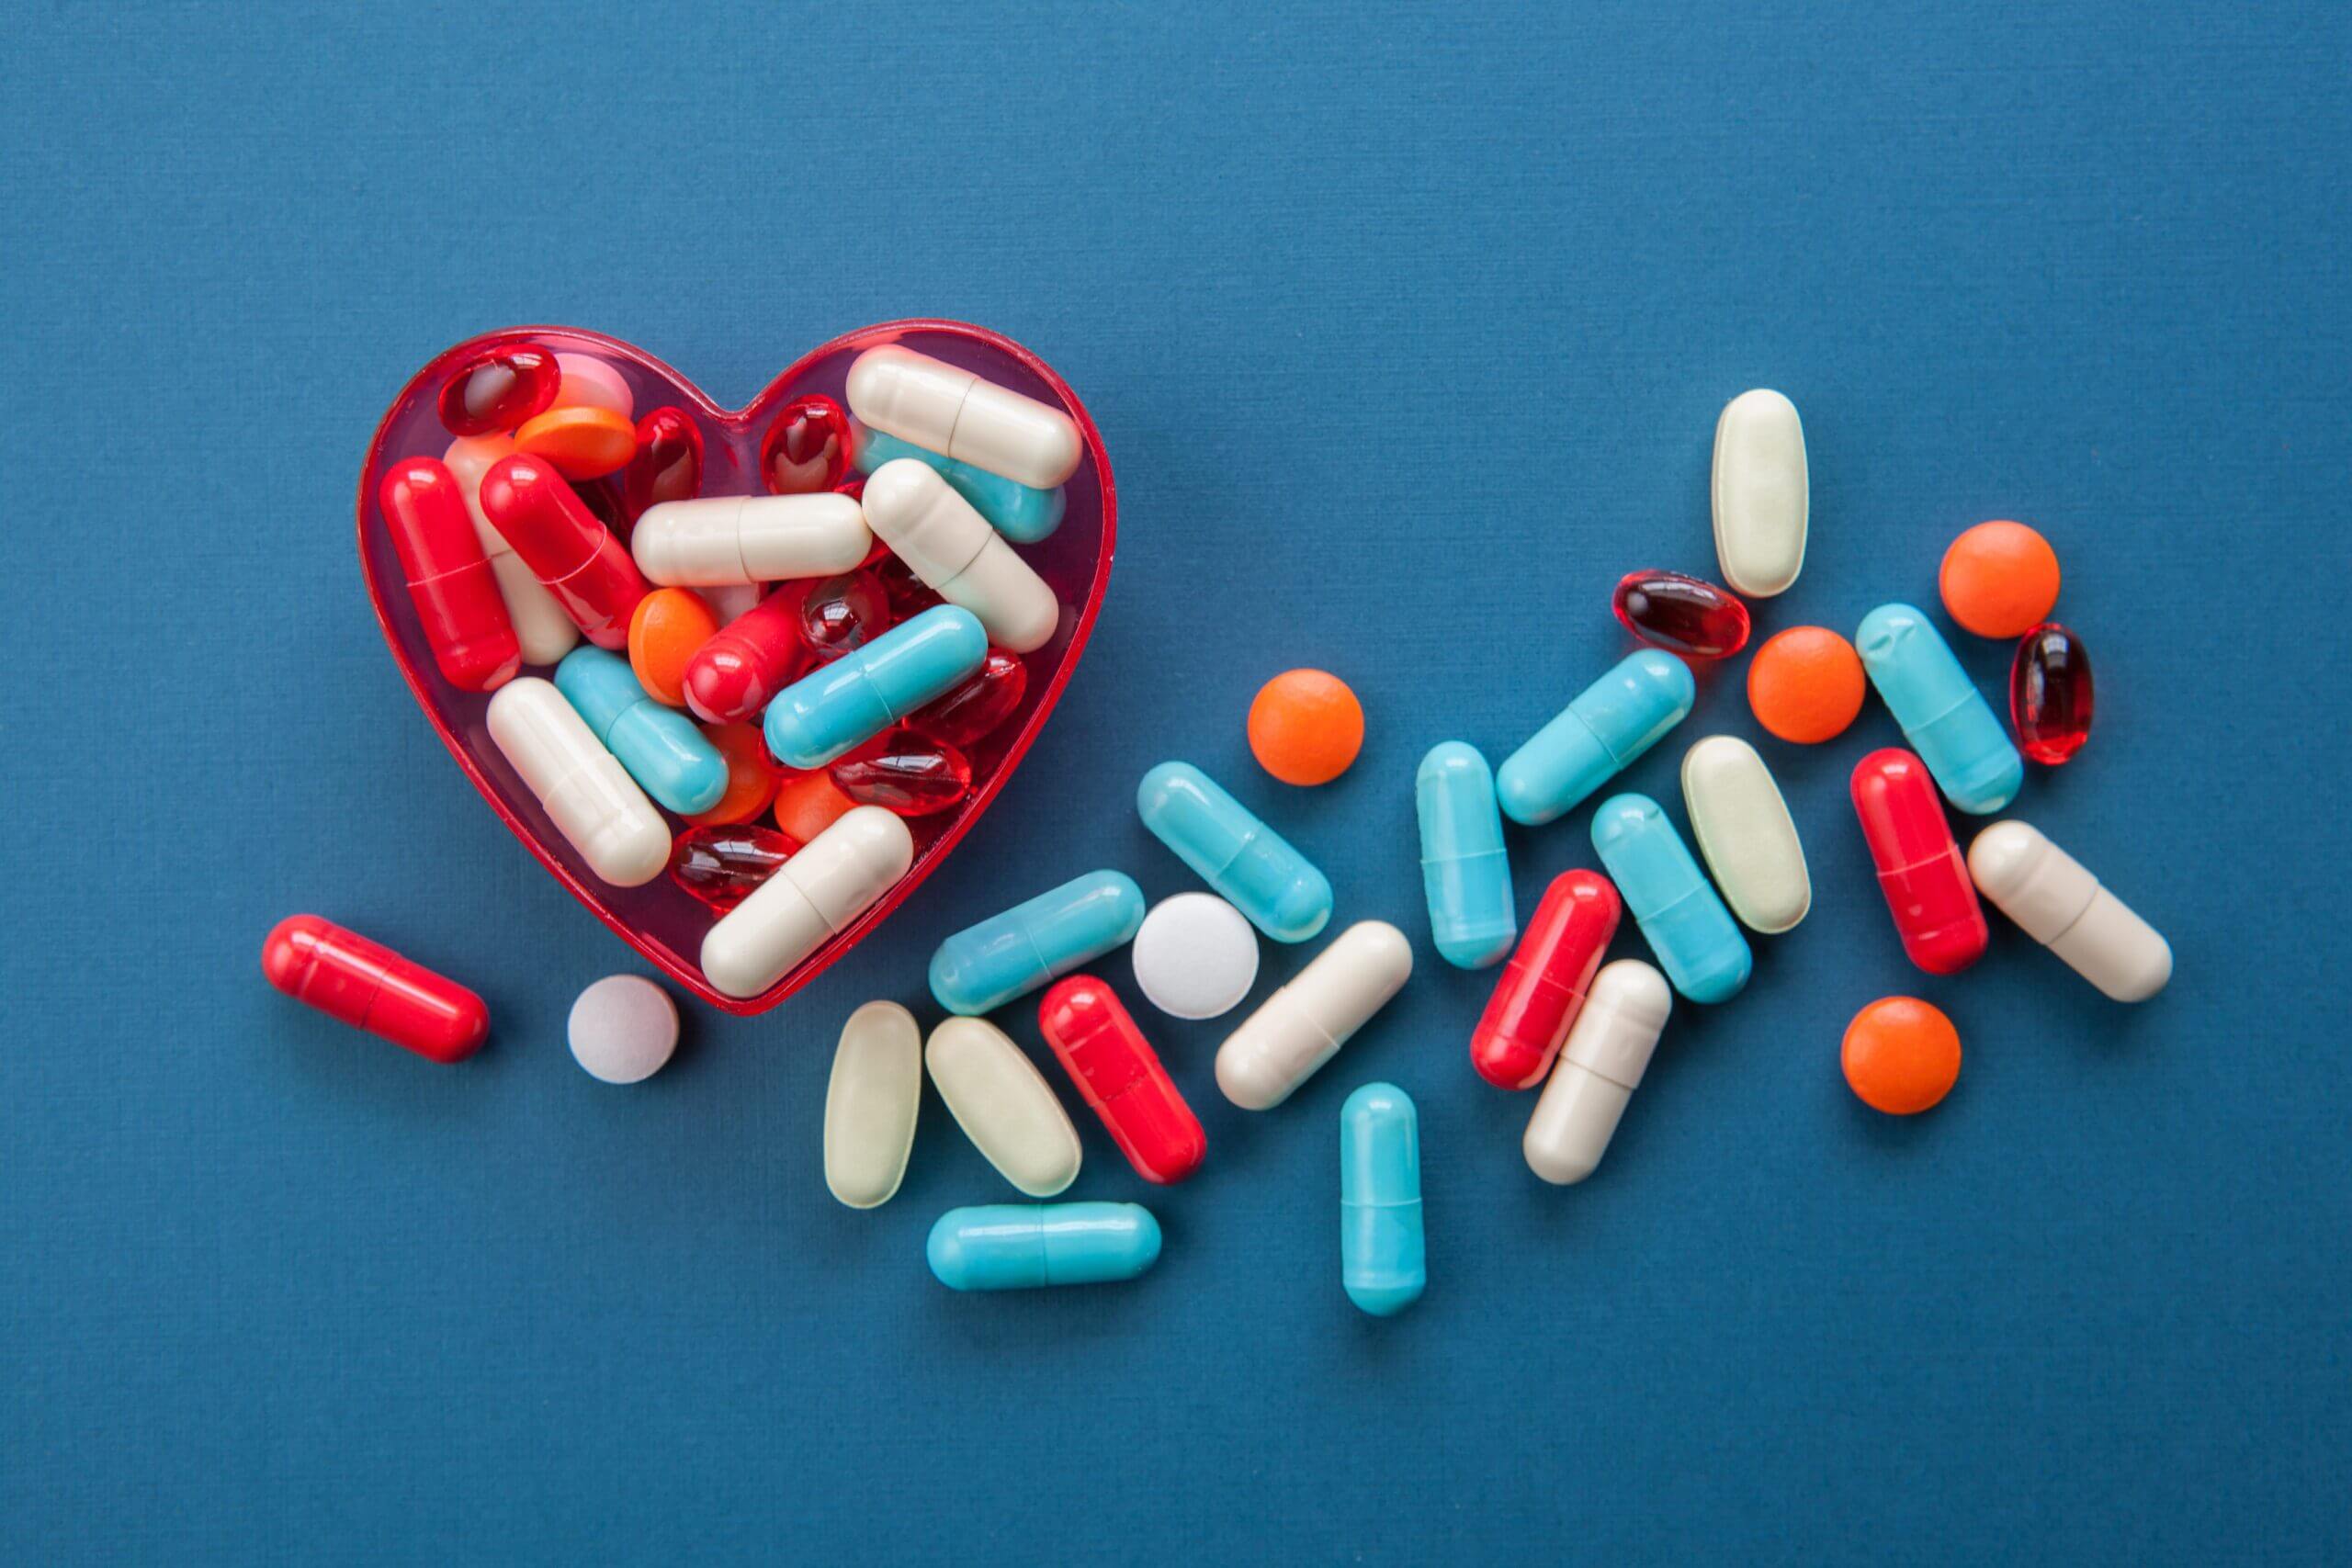 Pills in a heart shape container